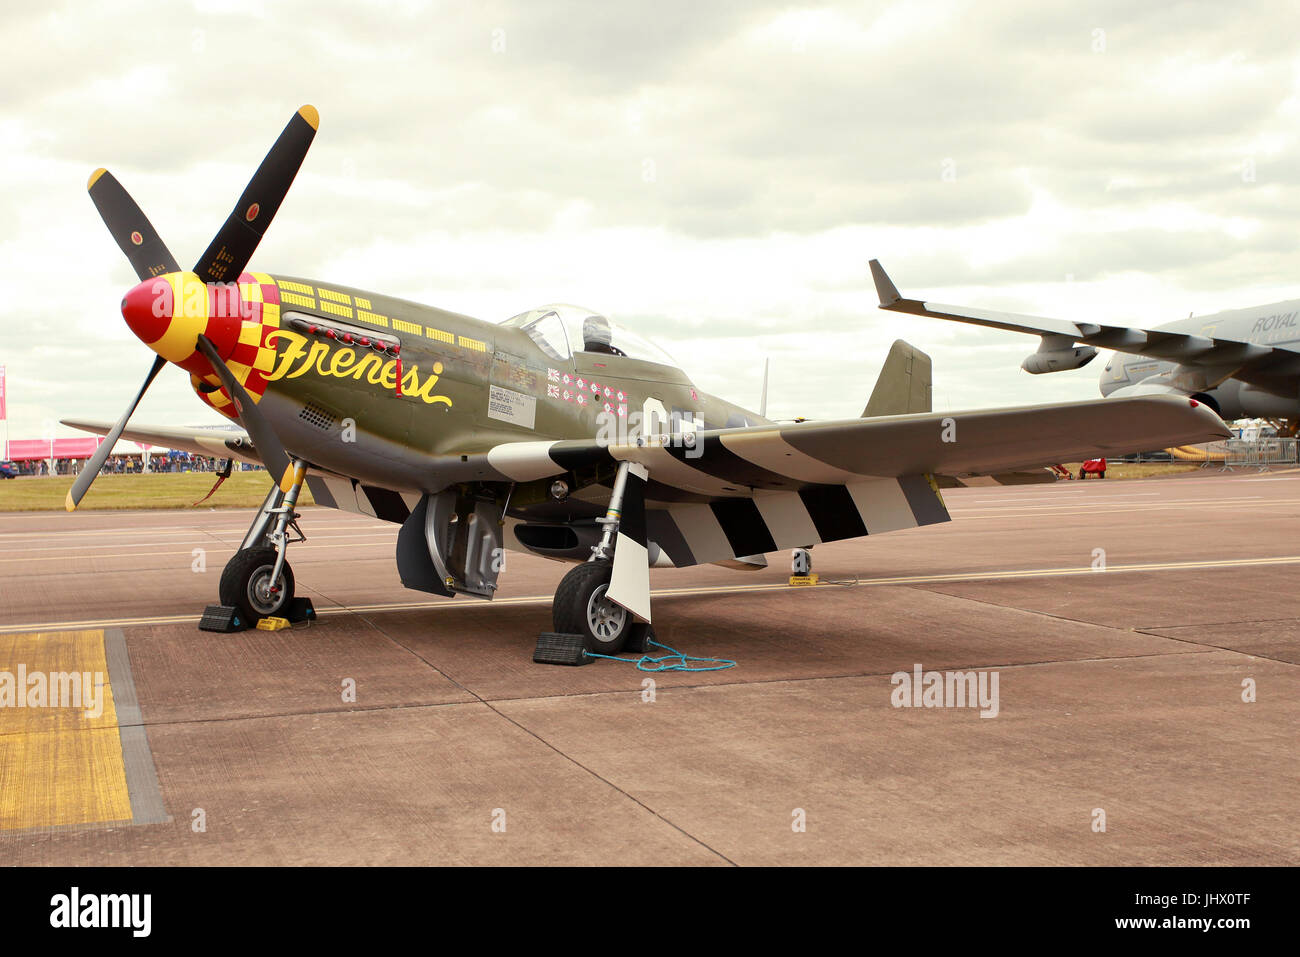 p51 Mustang fighter aircraft Stock Photo